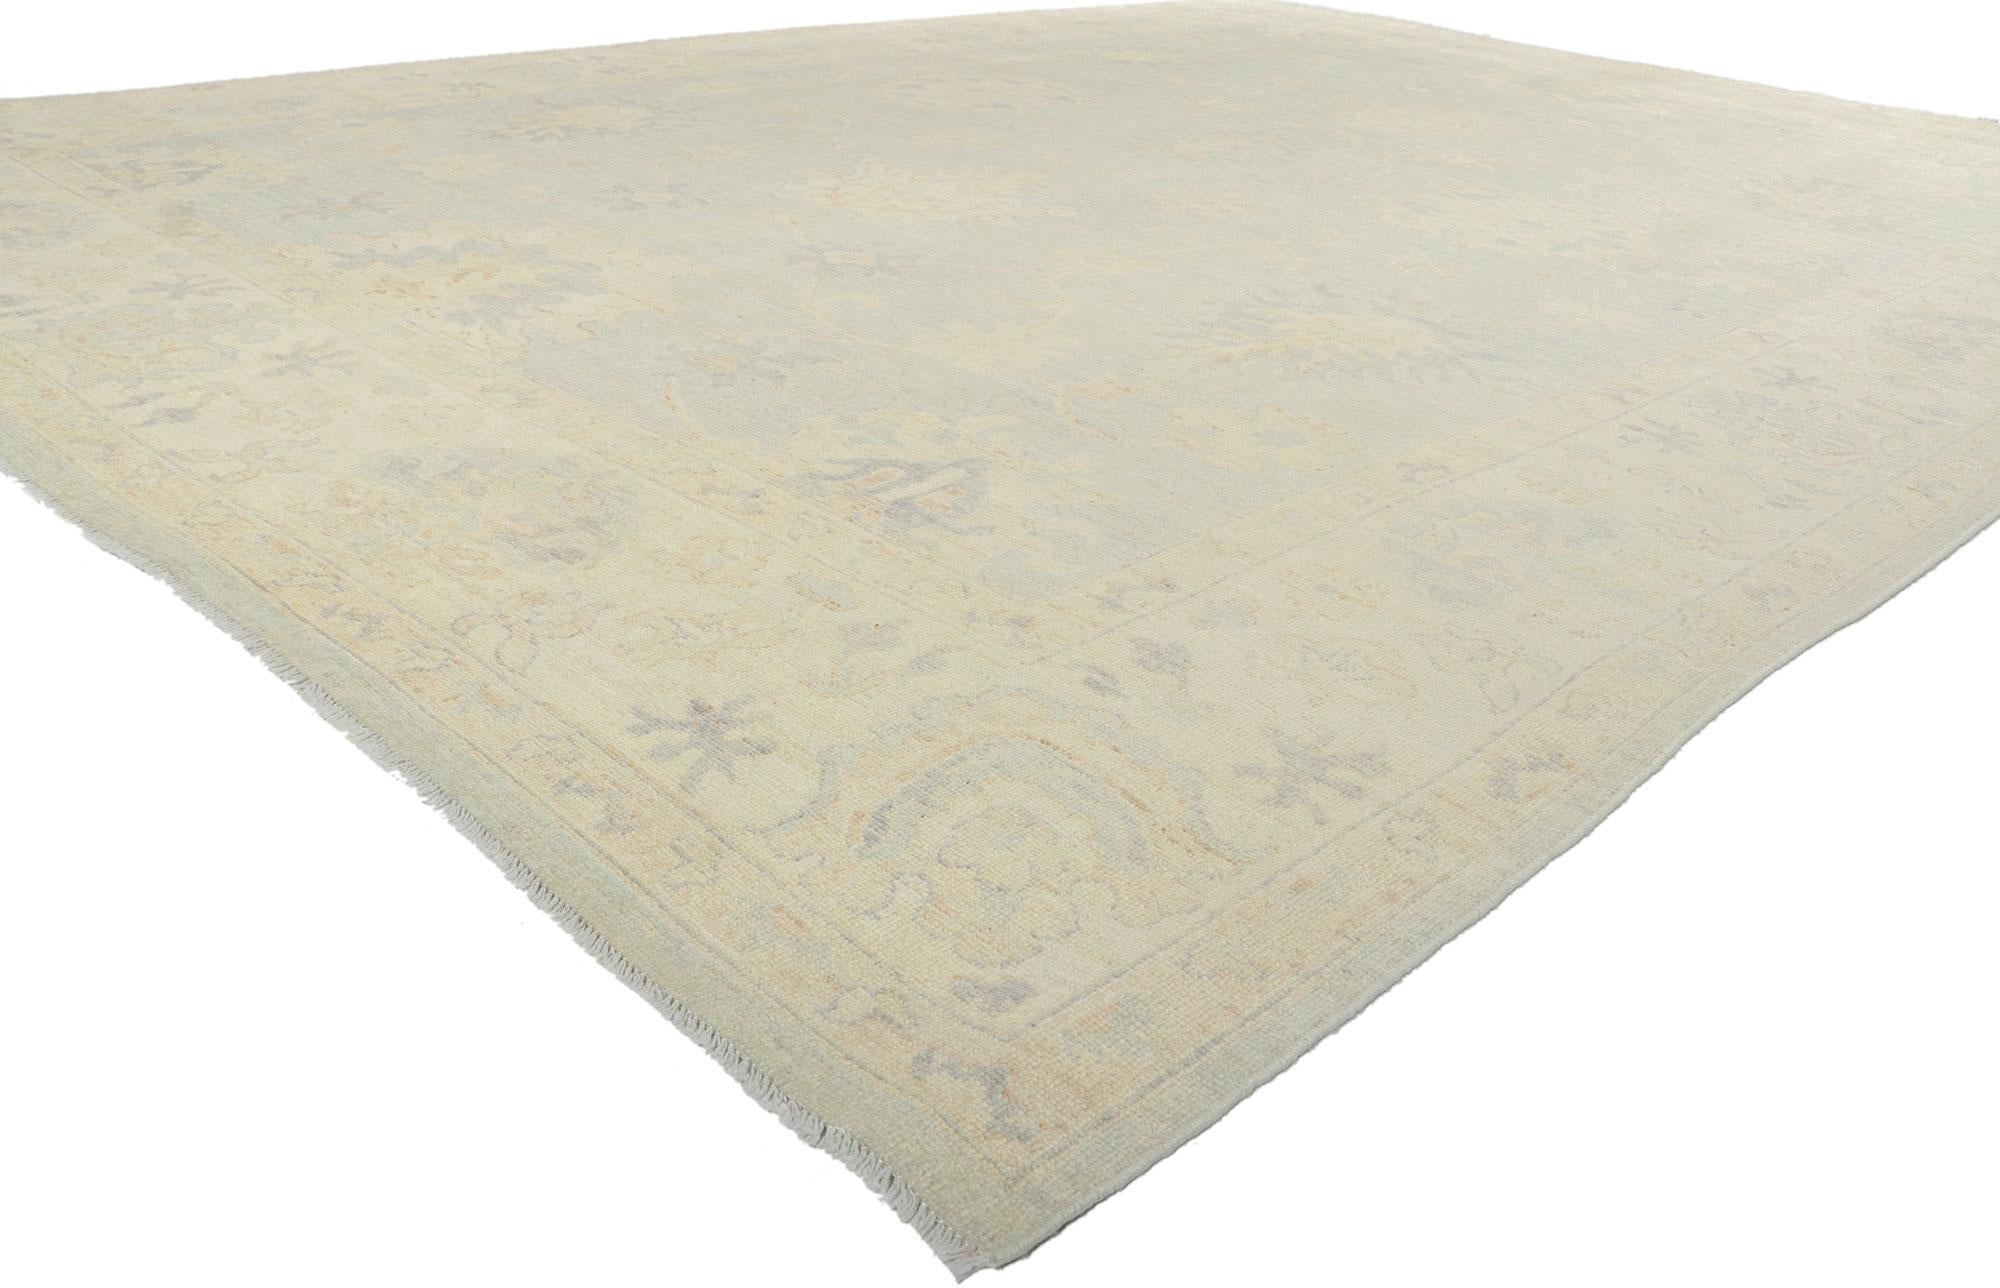 80215 New Vintage-Inspired Oushak Rug, 10.00 x 13.08. Emanating serenity and sophistication, this hand knotted wool modern Oushak style rug provides an elegant and genteel design aesthetic with soft subtle hues. It features an all-over botanical